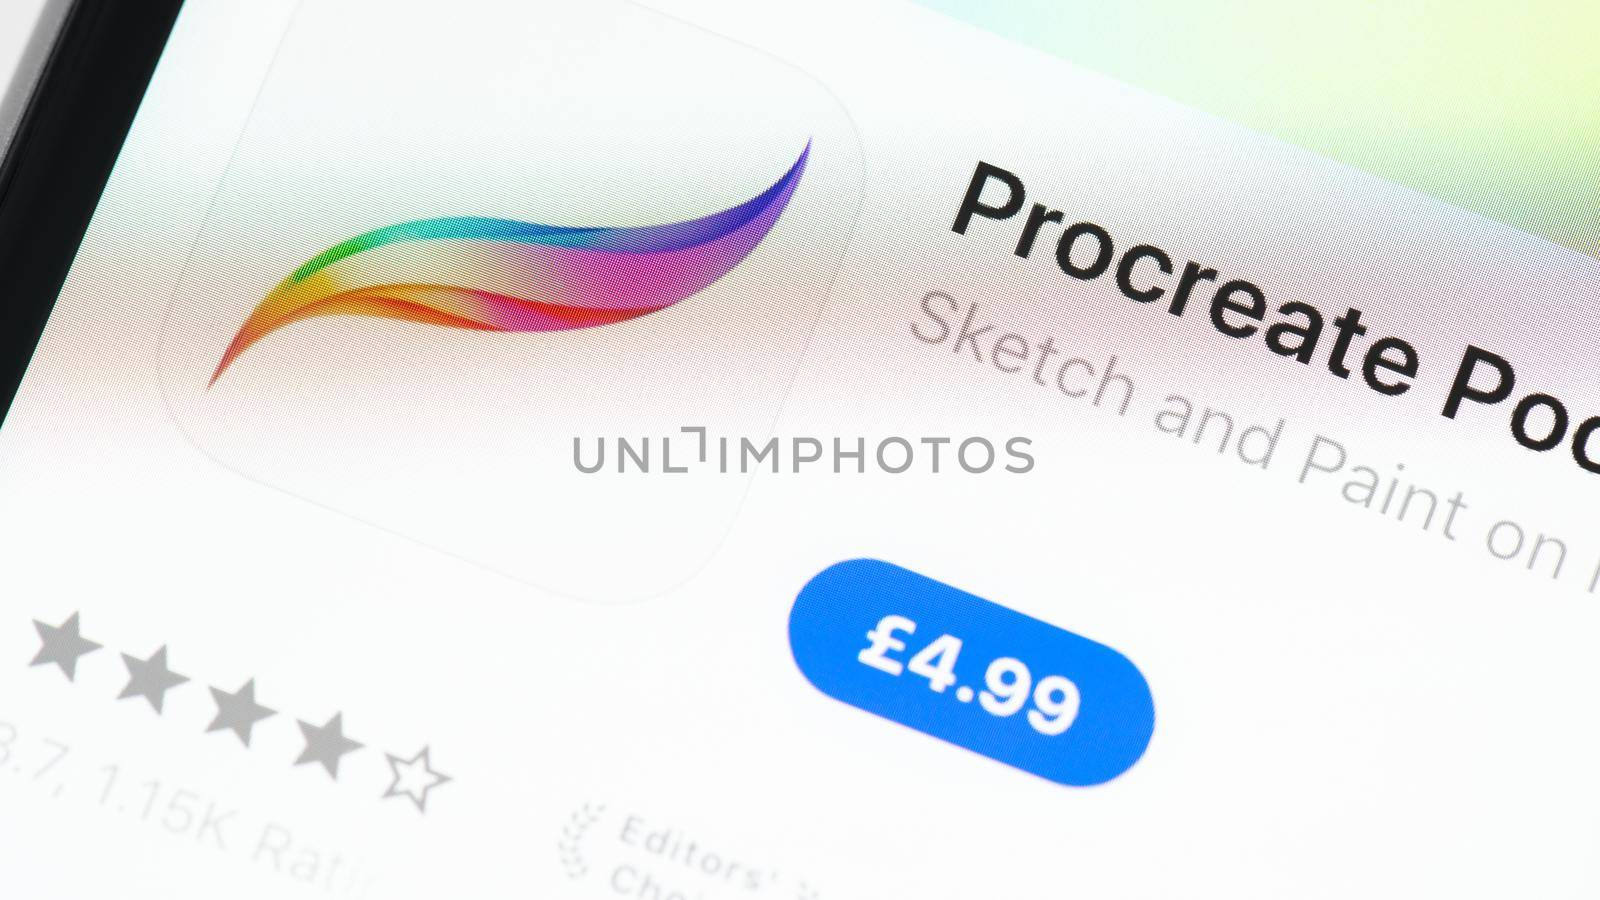 Procreate Pocket in the App Store on Apple iPhone screen by dutourdumonde